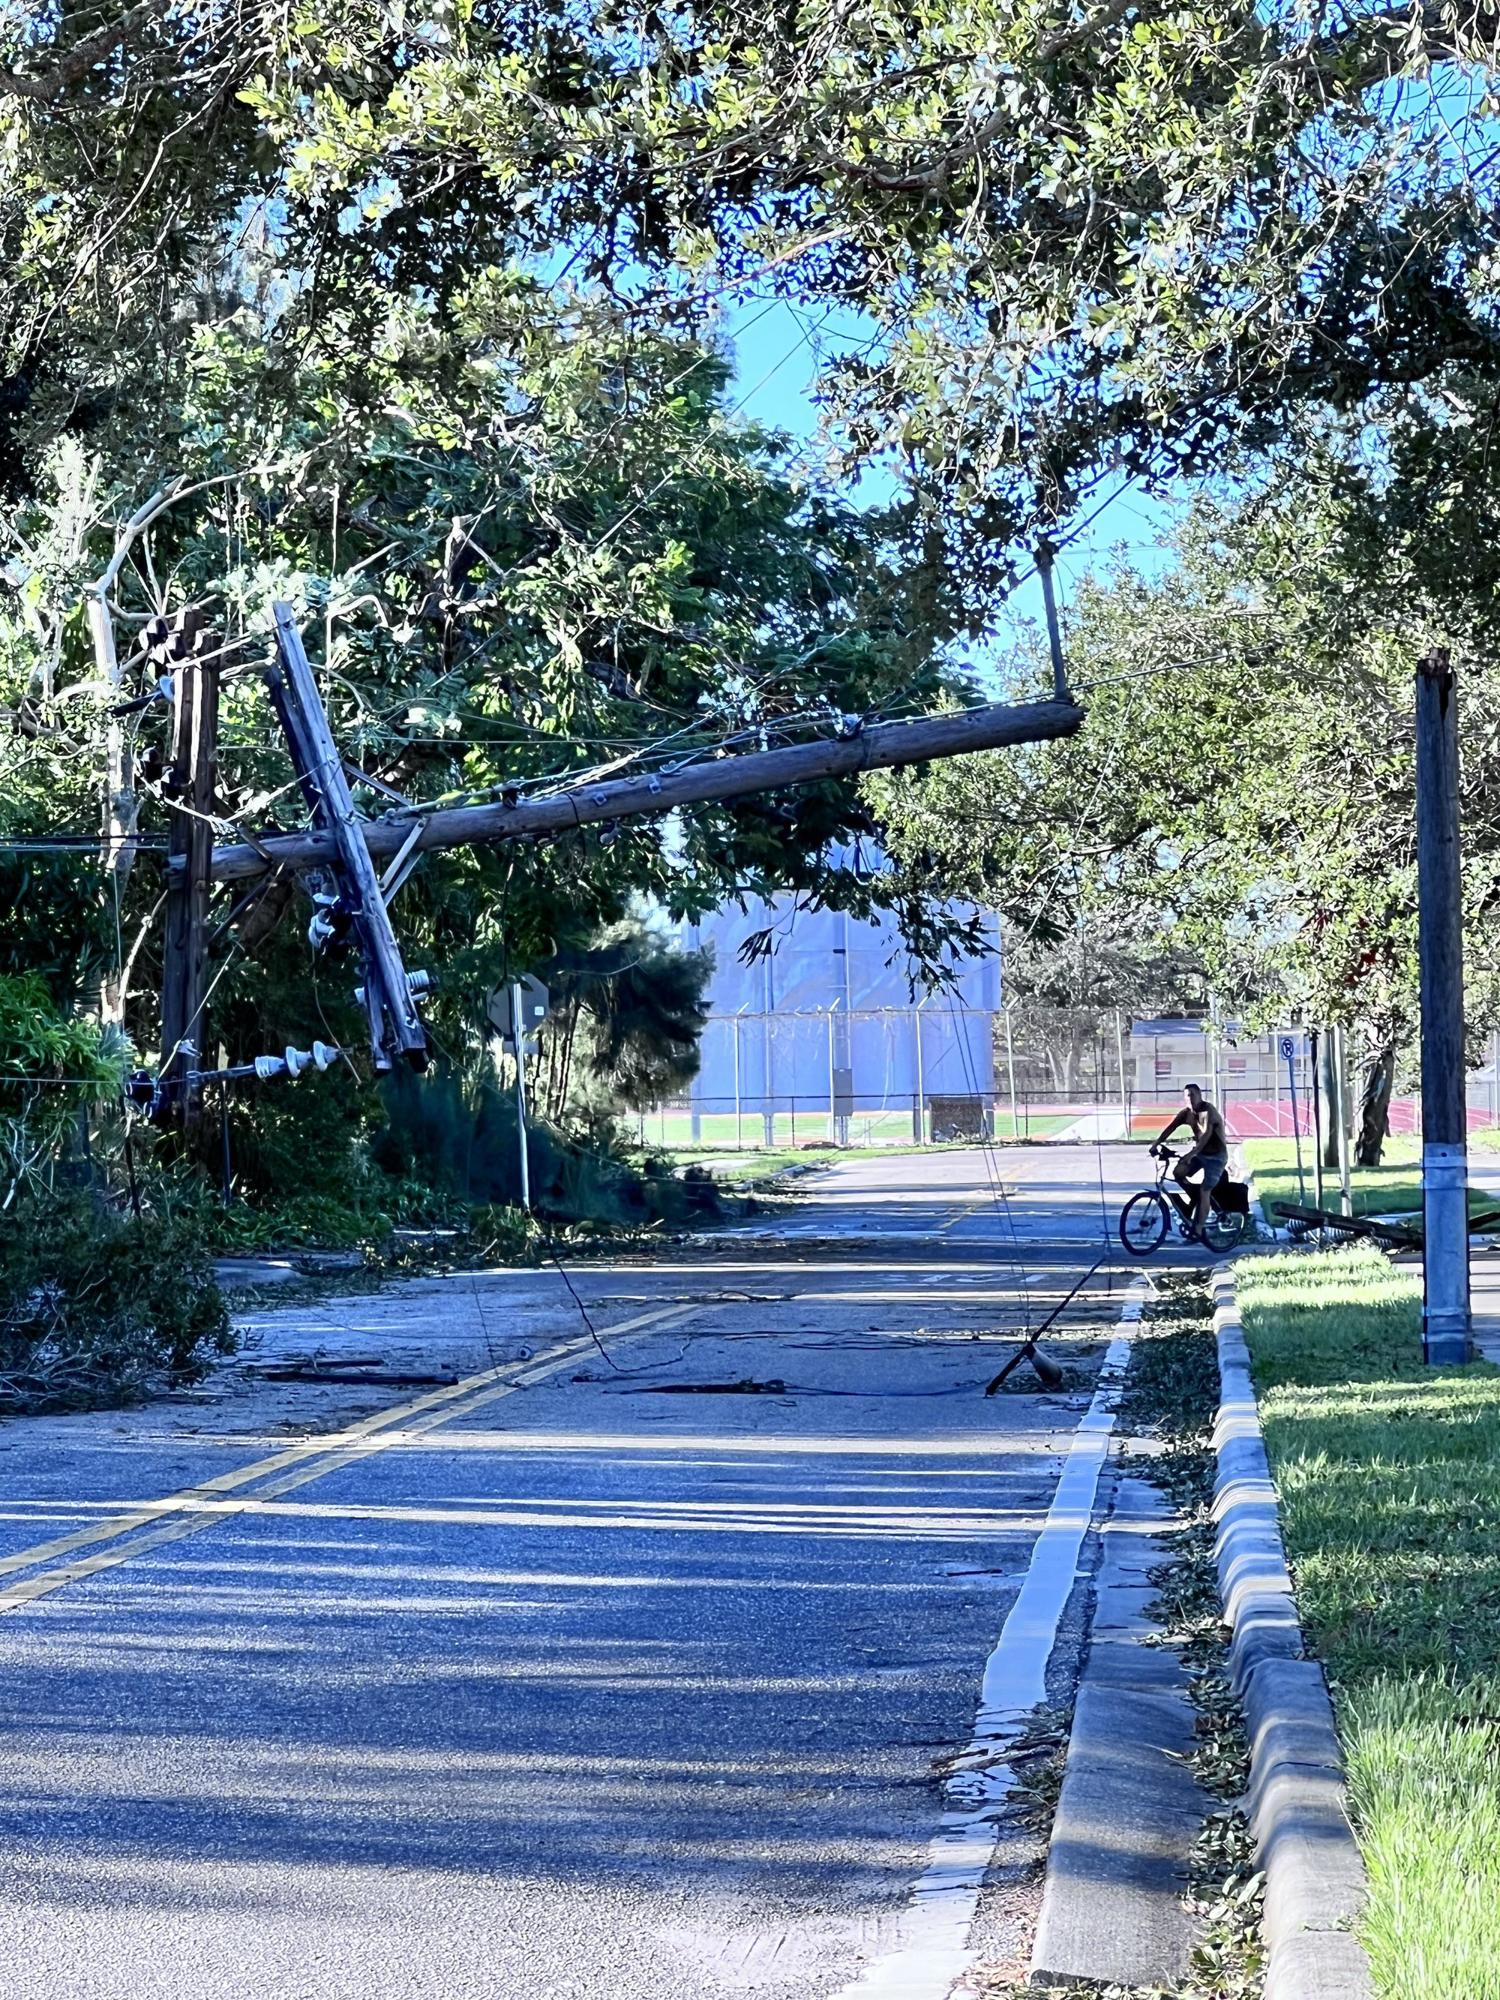 u/Ieathummus shared this photo on Reddit at 9:30 a.m. Friday of a downed power line near the downtown Publix off Wood Street.